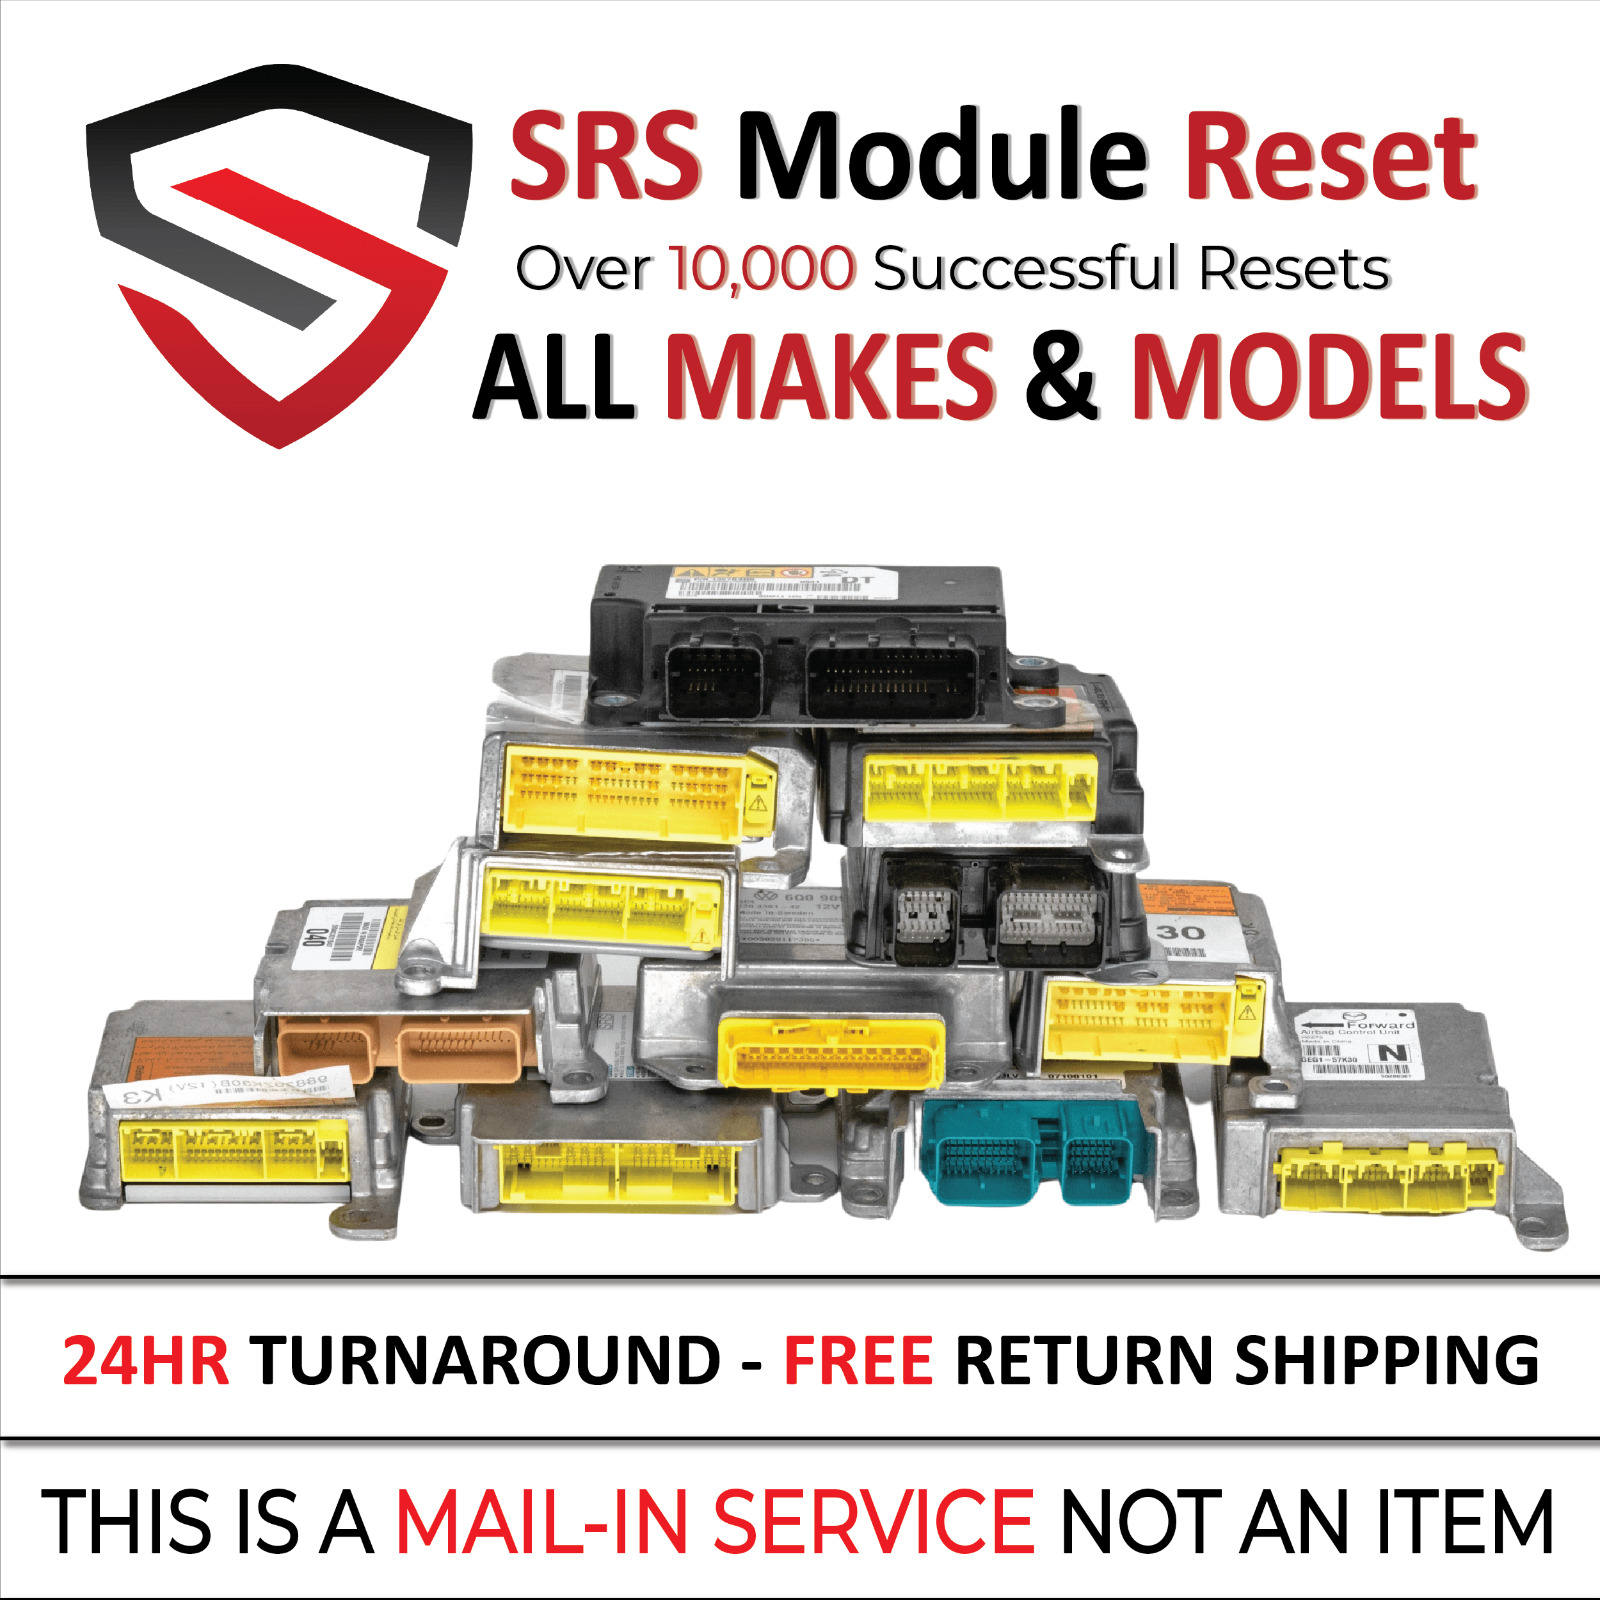 For Mazda SRS Module Reset Service - Guaranteed or Your Money Back